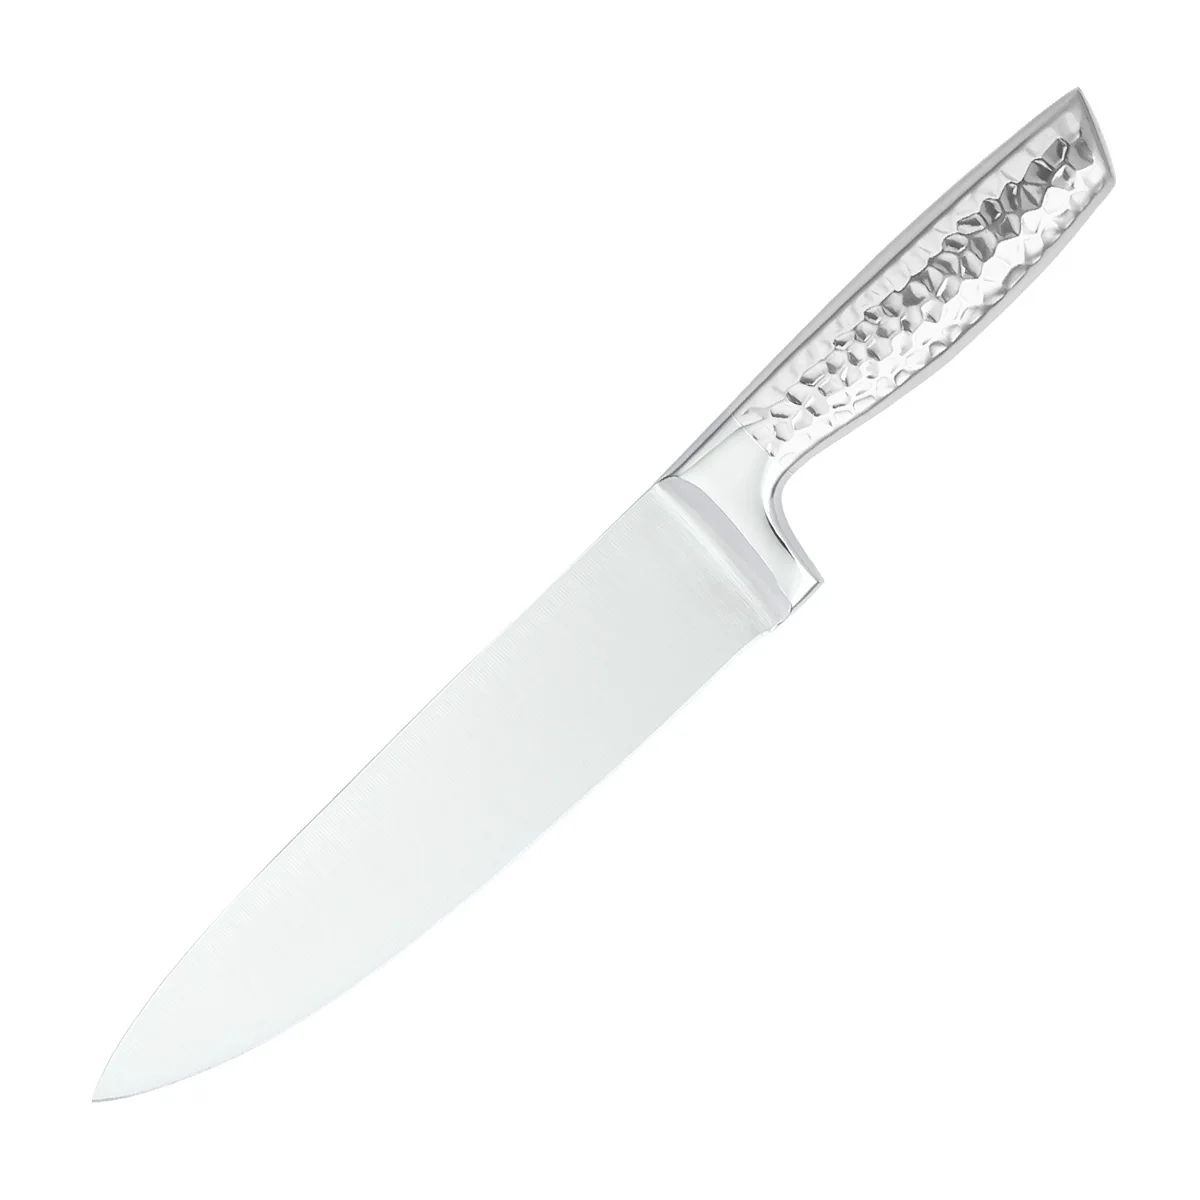 chef knife tool